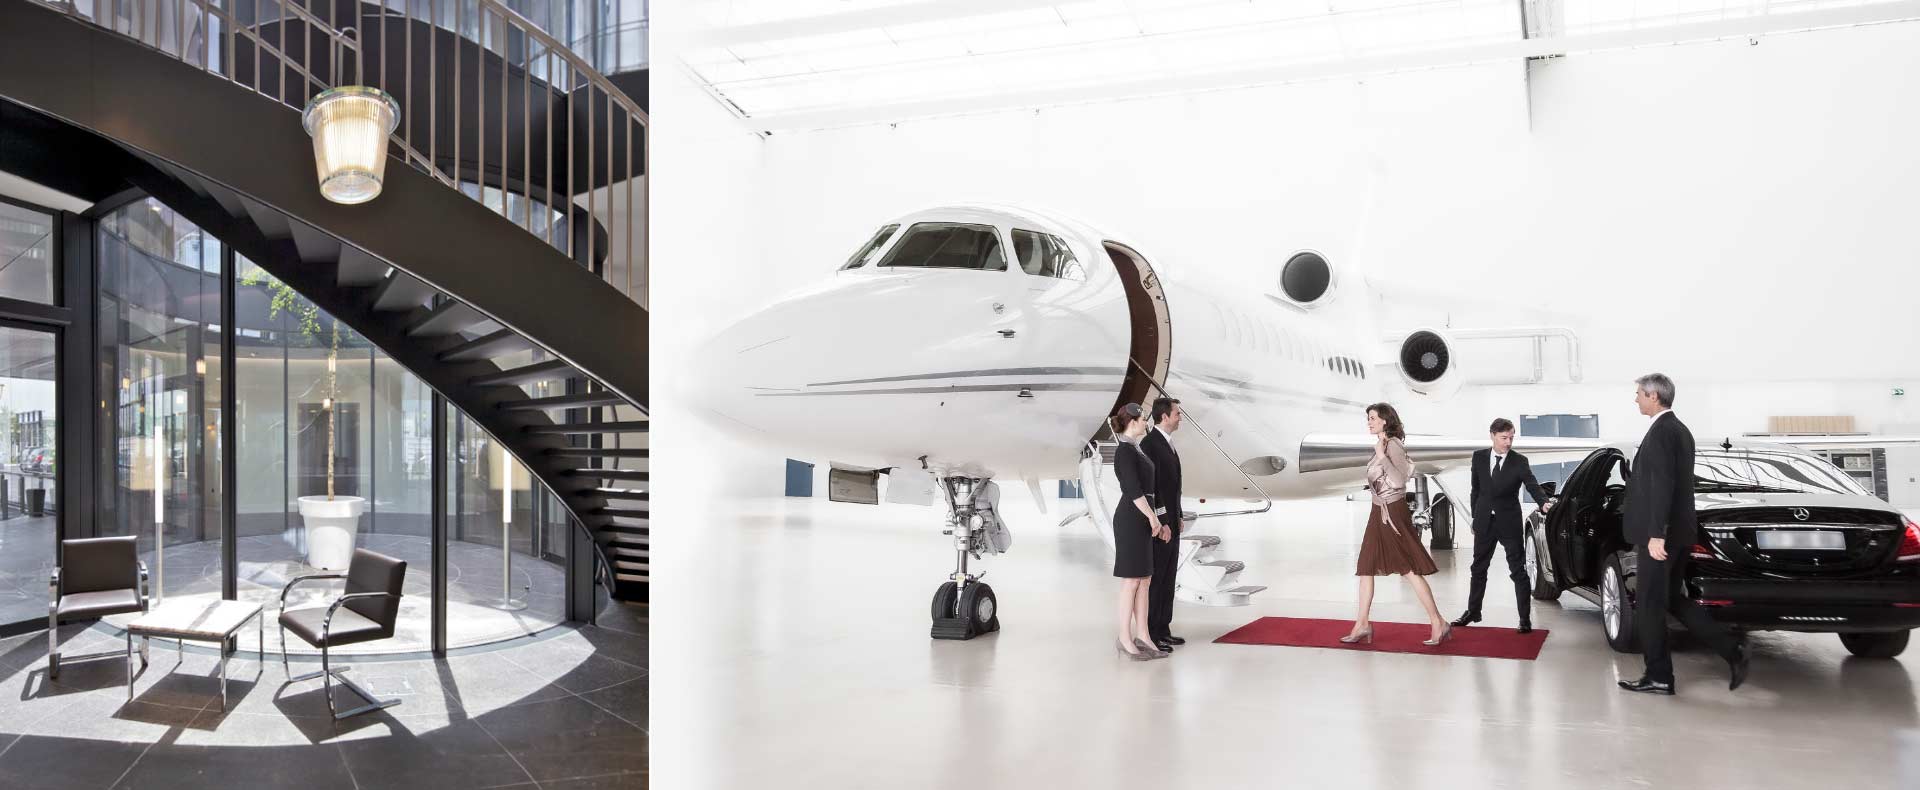 Experience Premier Ground Handling Services at our award-winning Paris FBO 